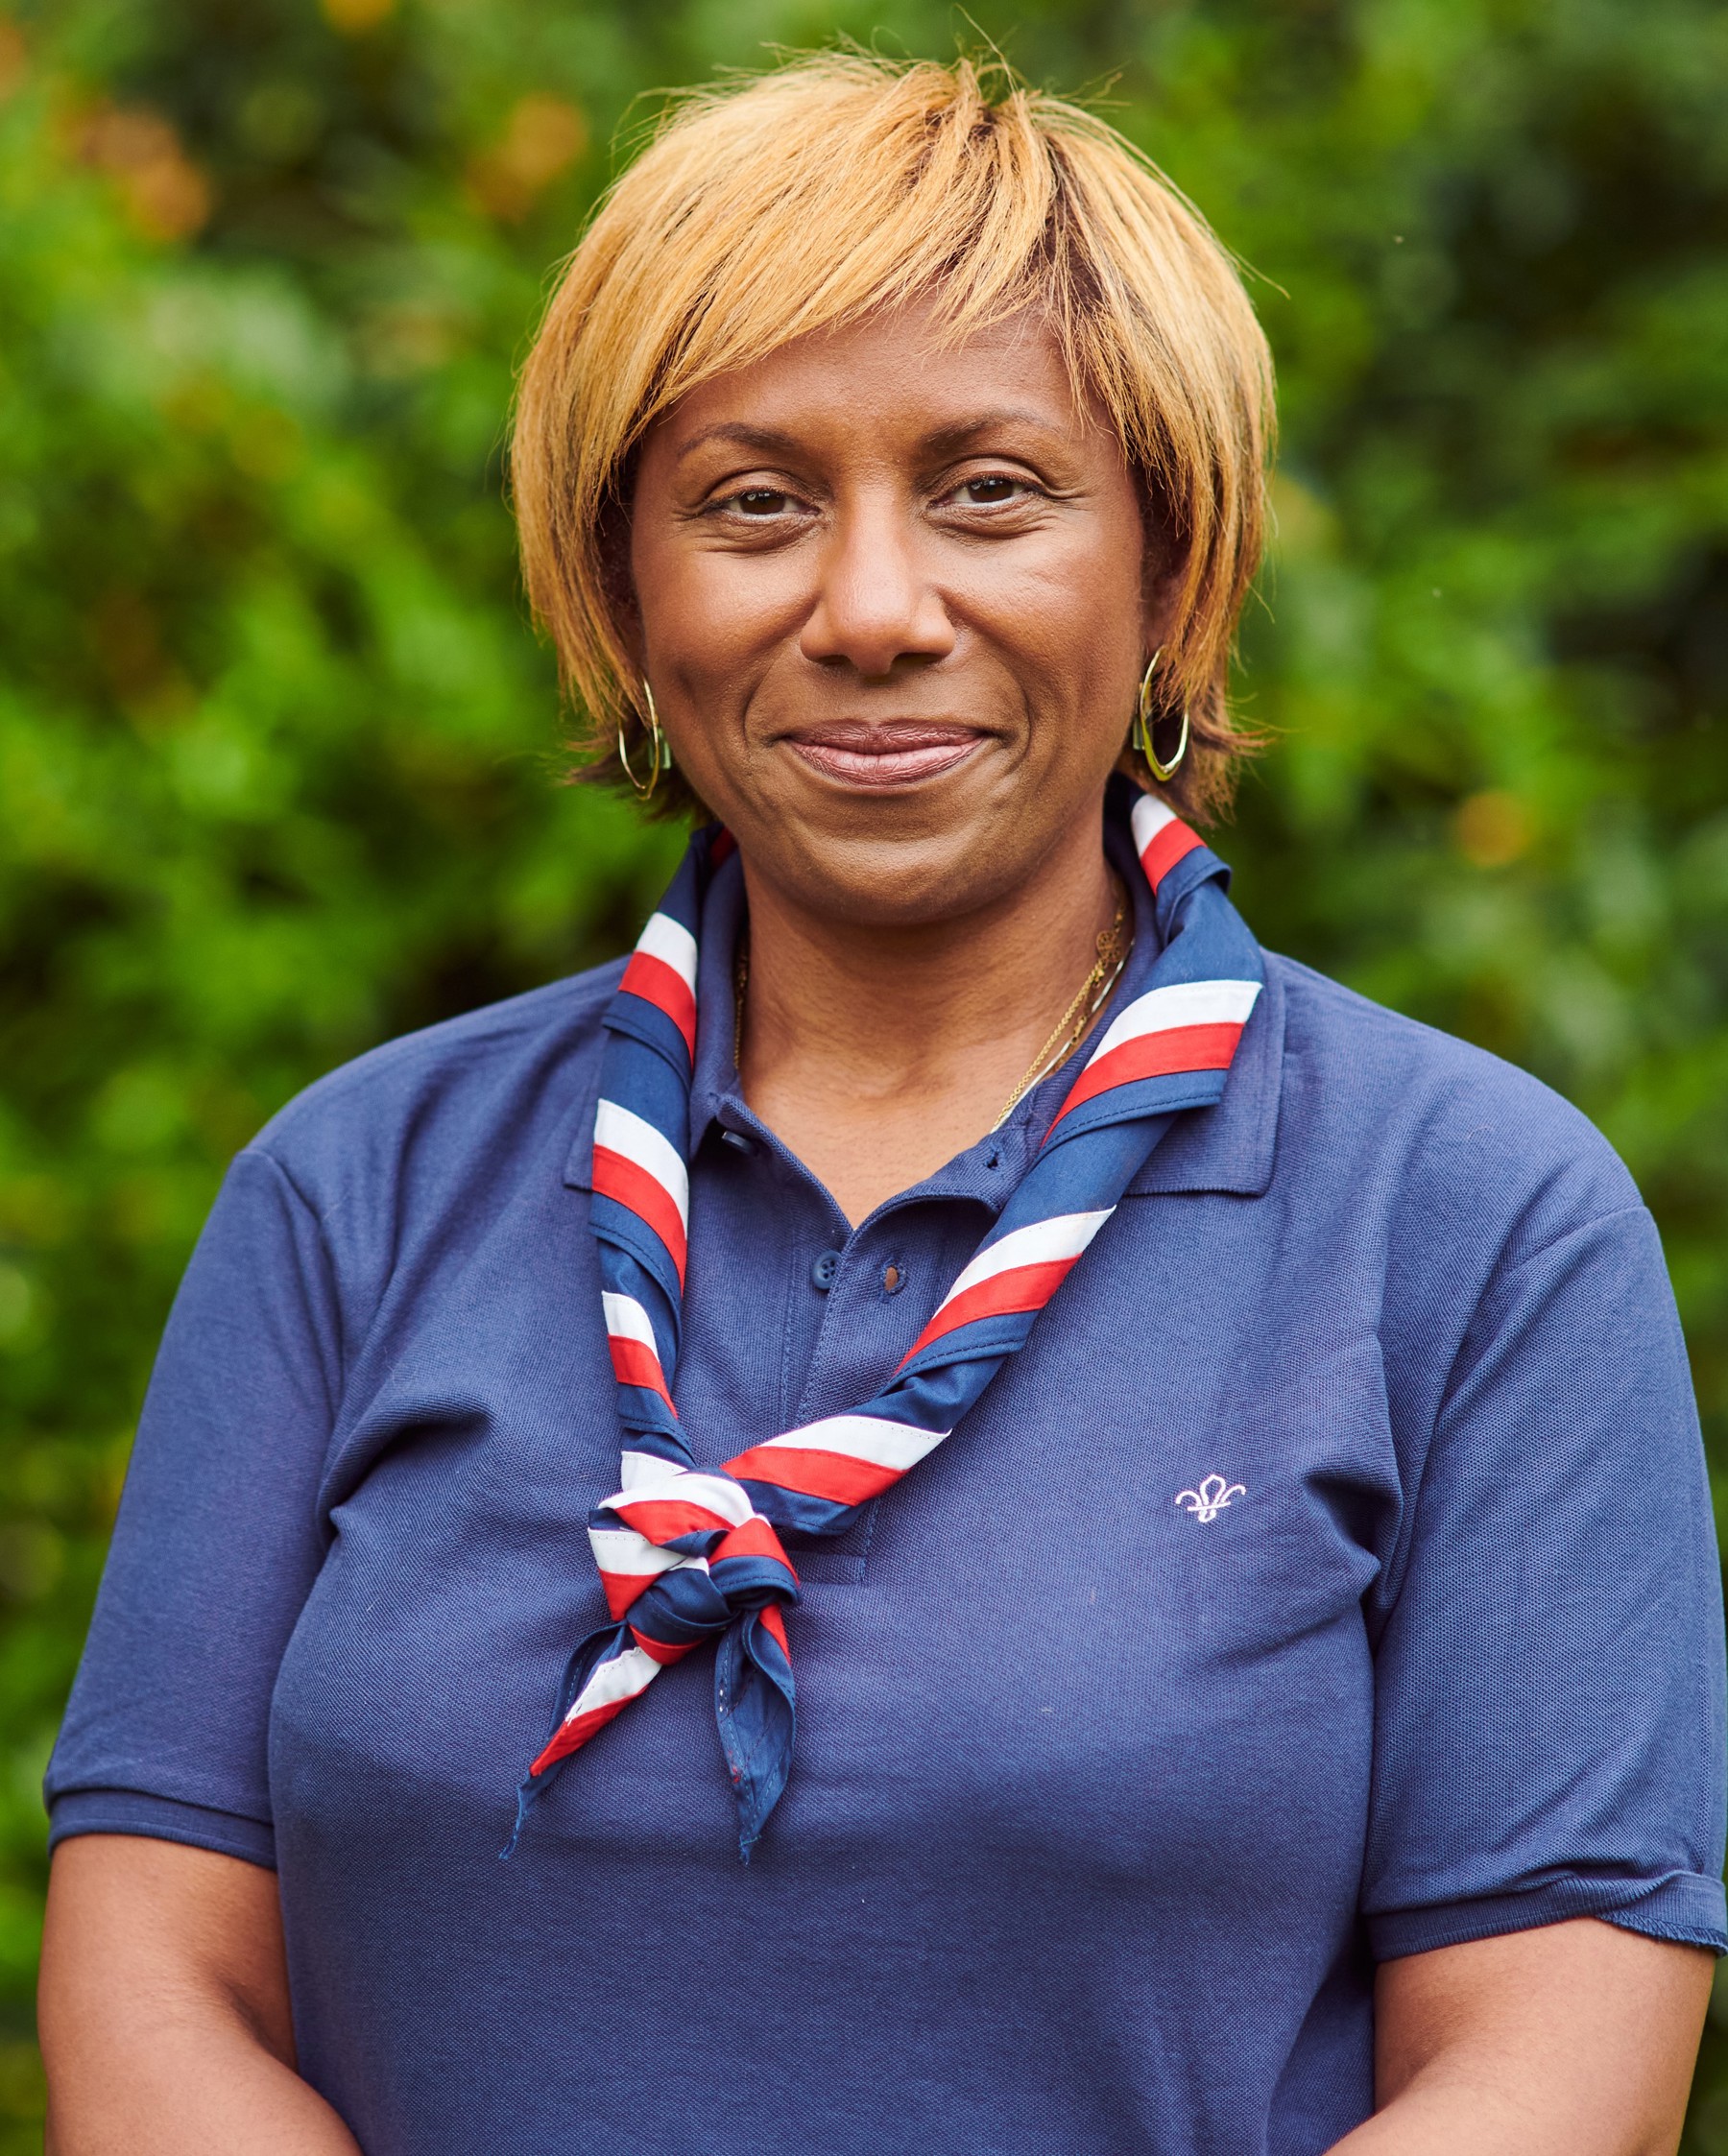 Sharon Lee smiling at the camera while wearing a navy Scouts polo shirt and stripy scarf